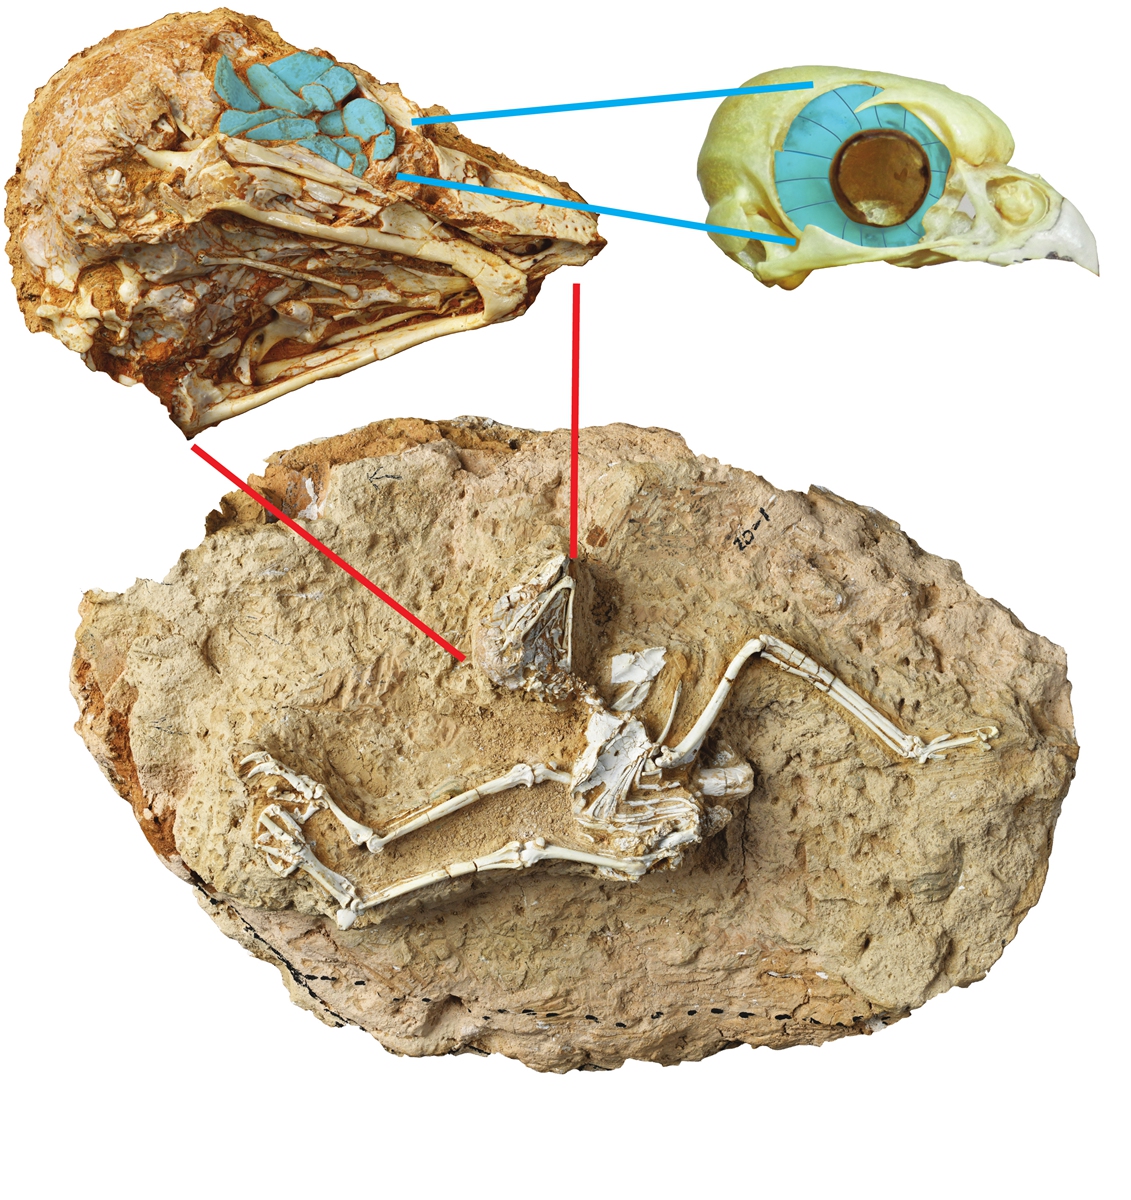 A well-preserved fossil of an owl found in China's Qinghai-Xizang Plateau  Photo: Courtesy of Institute of Vertebrate Paleontology and Paleoanthropology of the Chinese Academy of Sciences